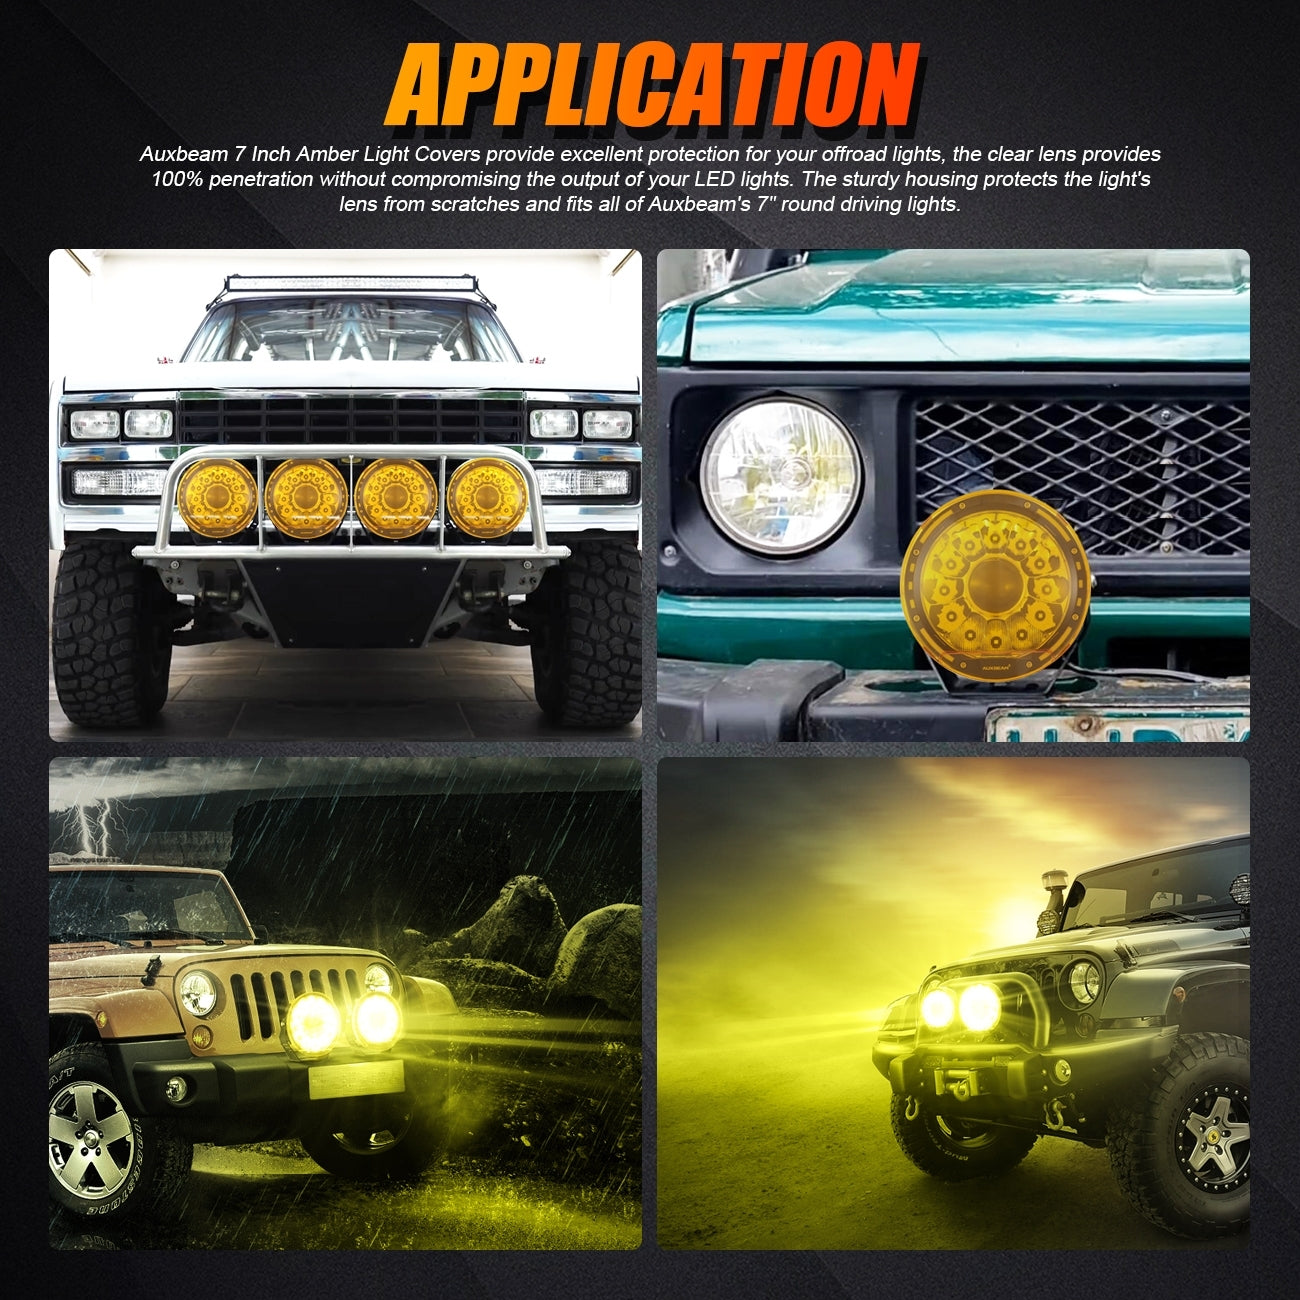 Auxbeam® 7 Inch Round Off Road Light,4wd driving lights,4x4 spotlights